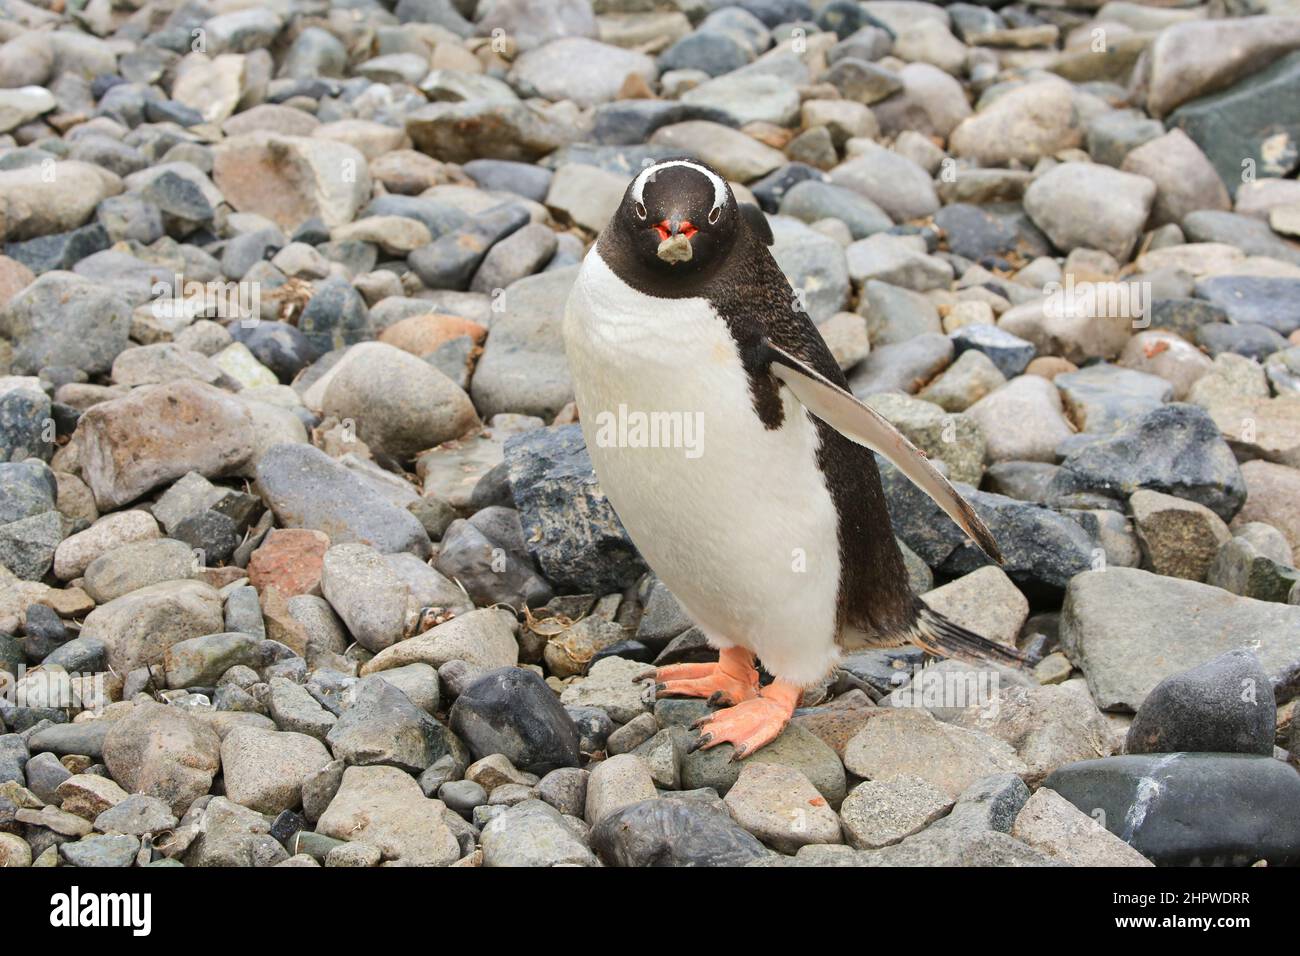 A Gentoo penguin colony on Cuverville Island, Antarctica, is carrying a stone in its beak for nest building. Stock Photo